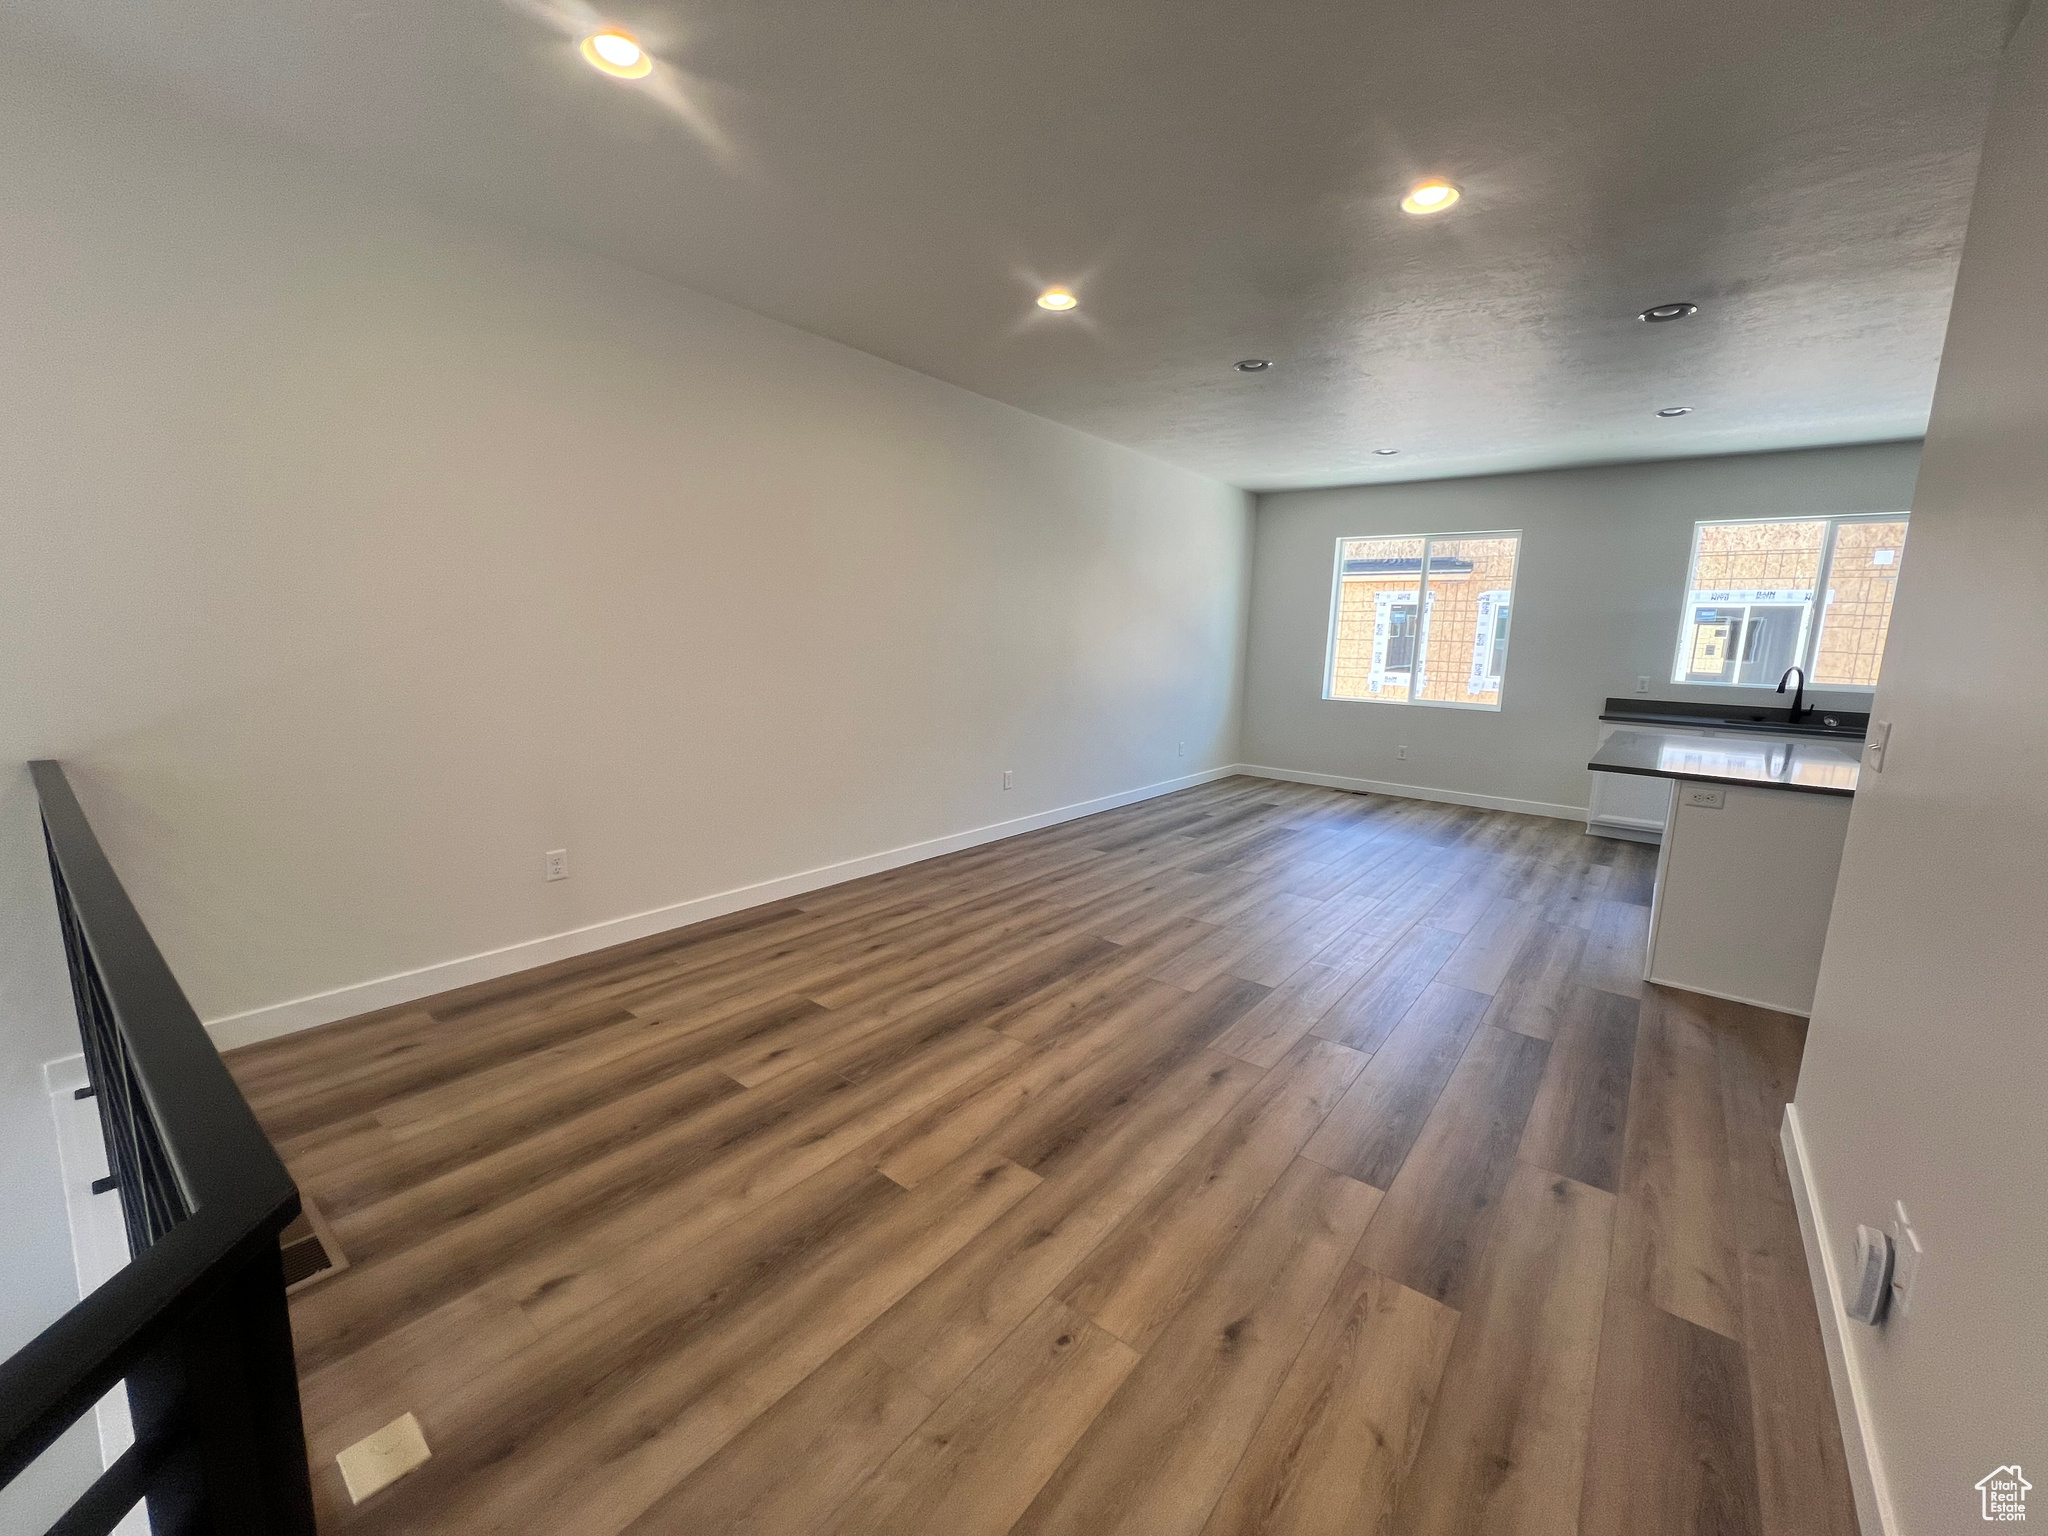 Unfurnished living room with dark wood-type flooring